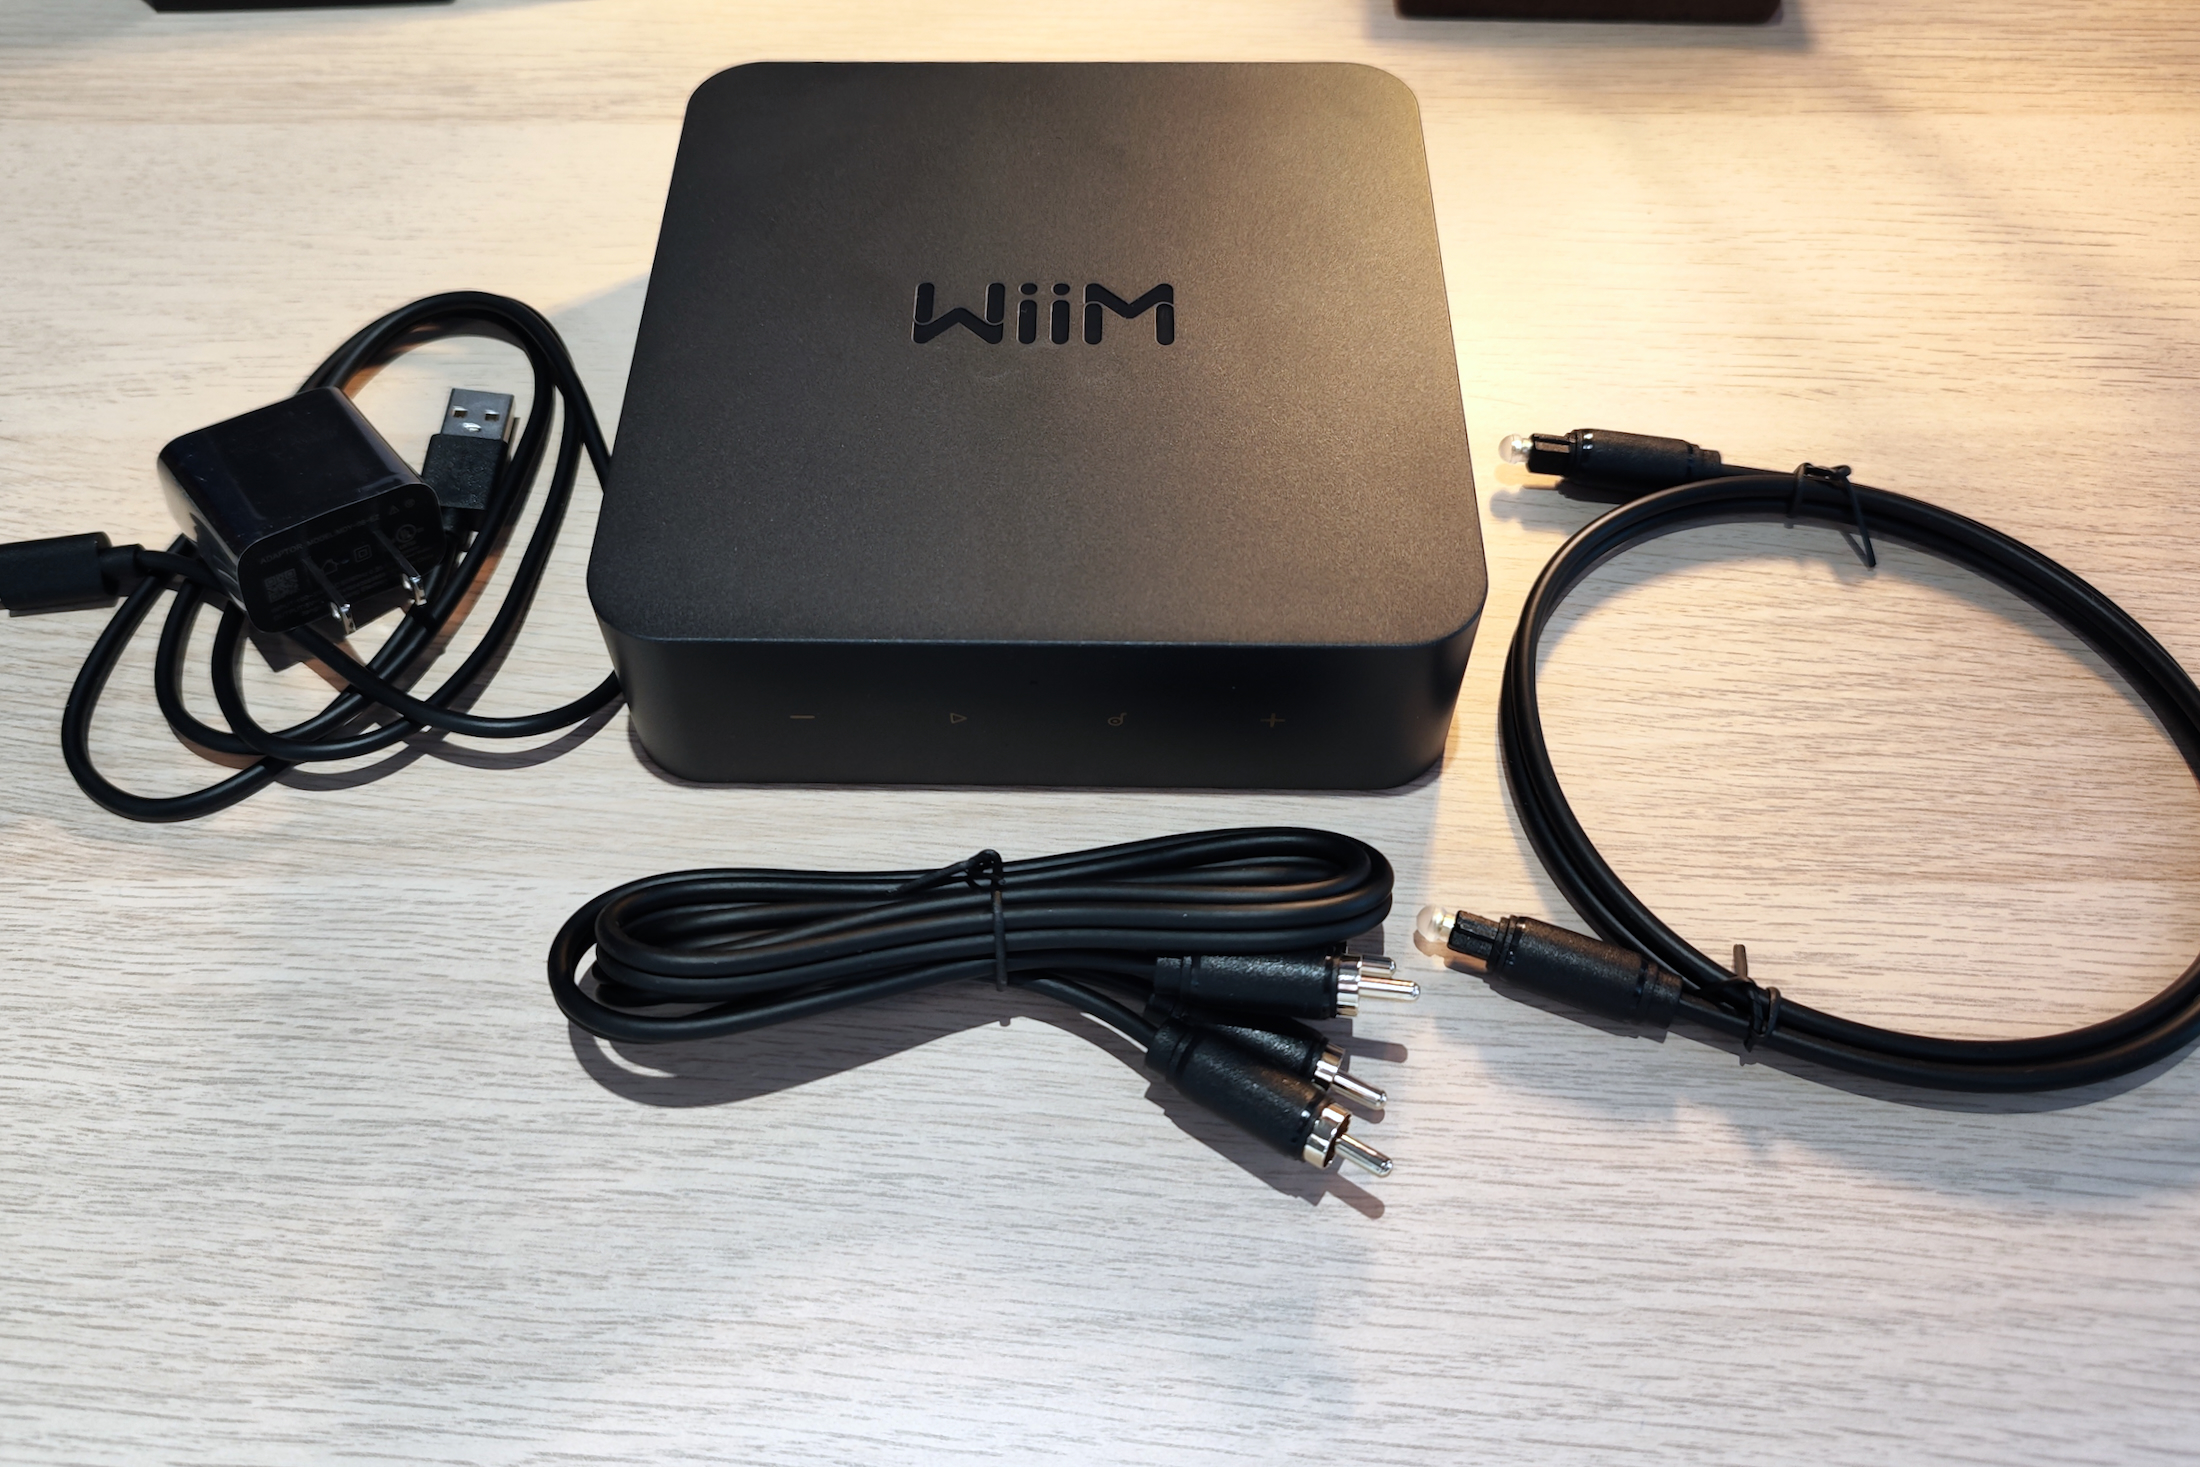 Wiim Pro review: this could be Sonos' worst nightmare | Digital Trends